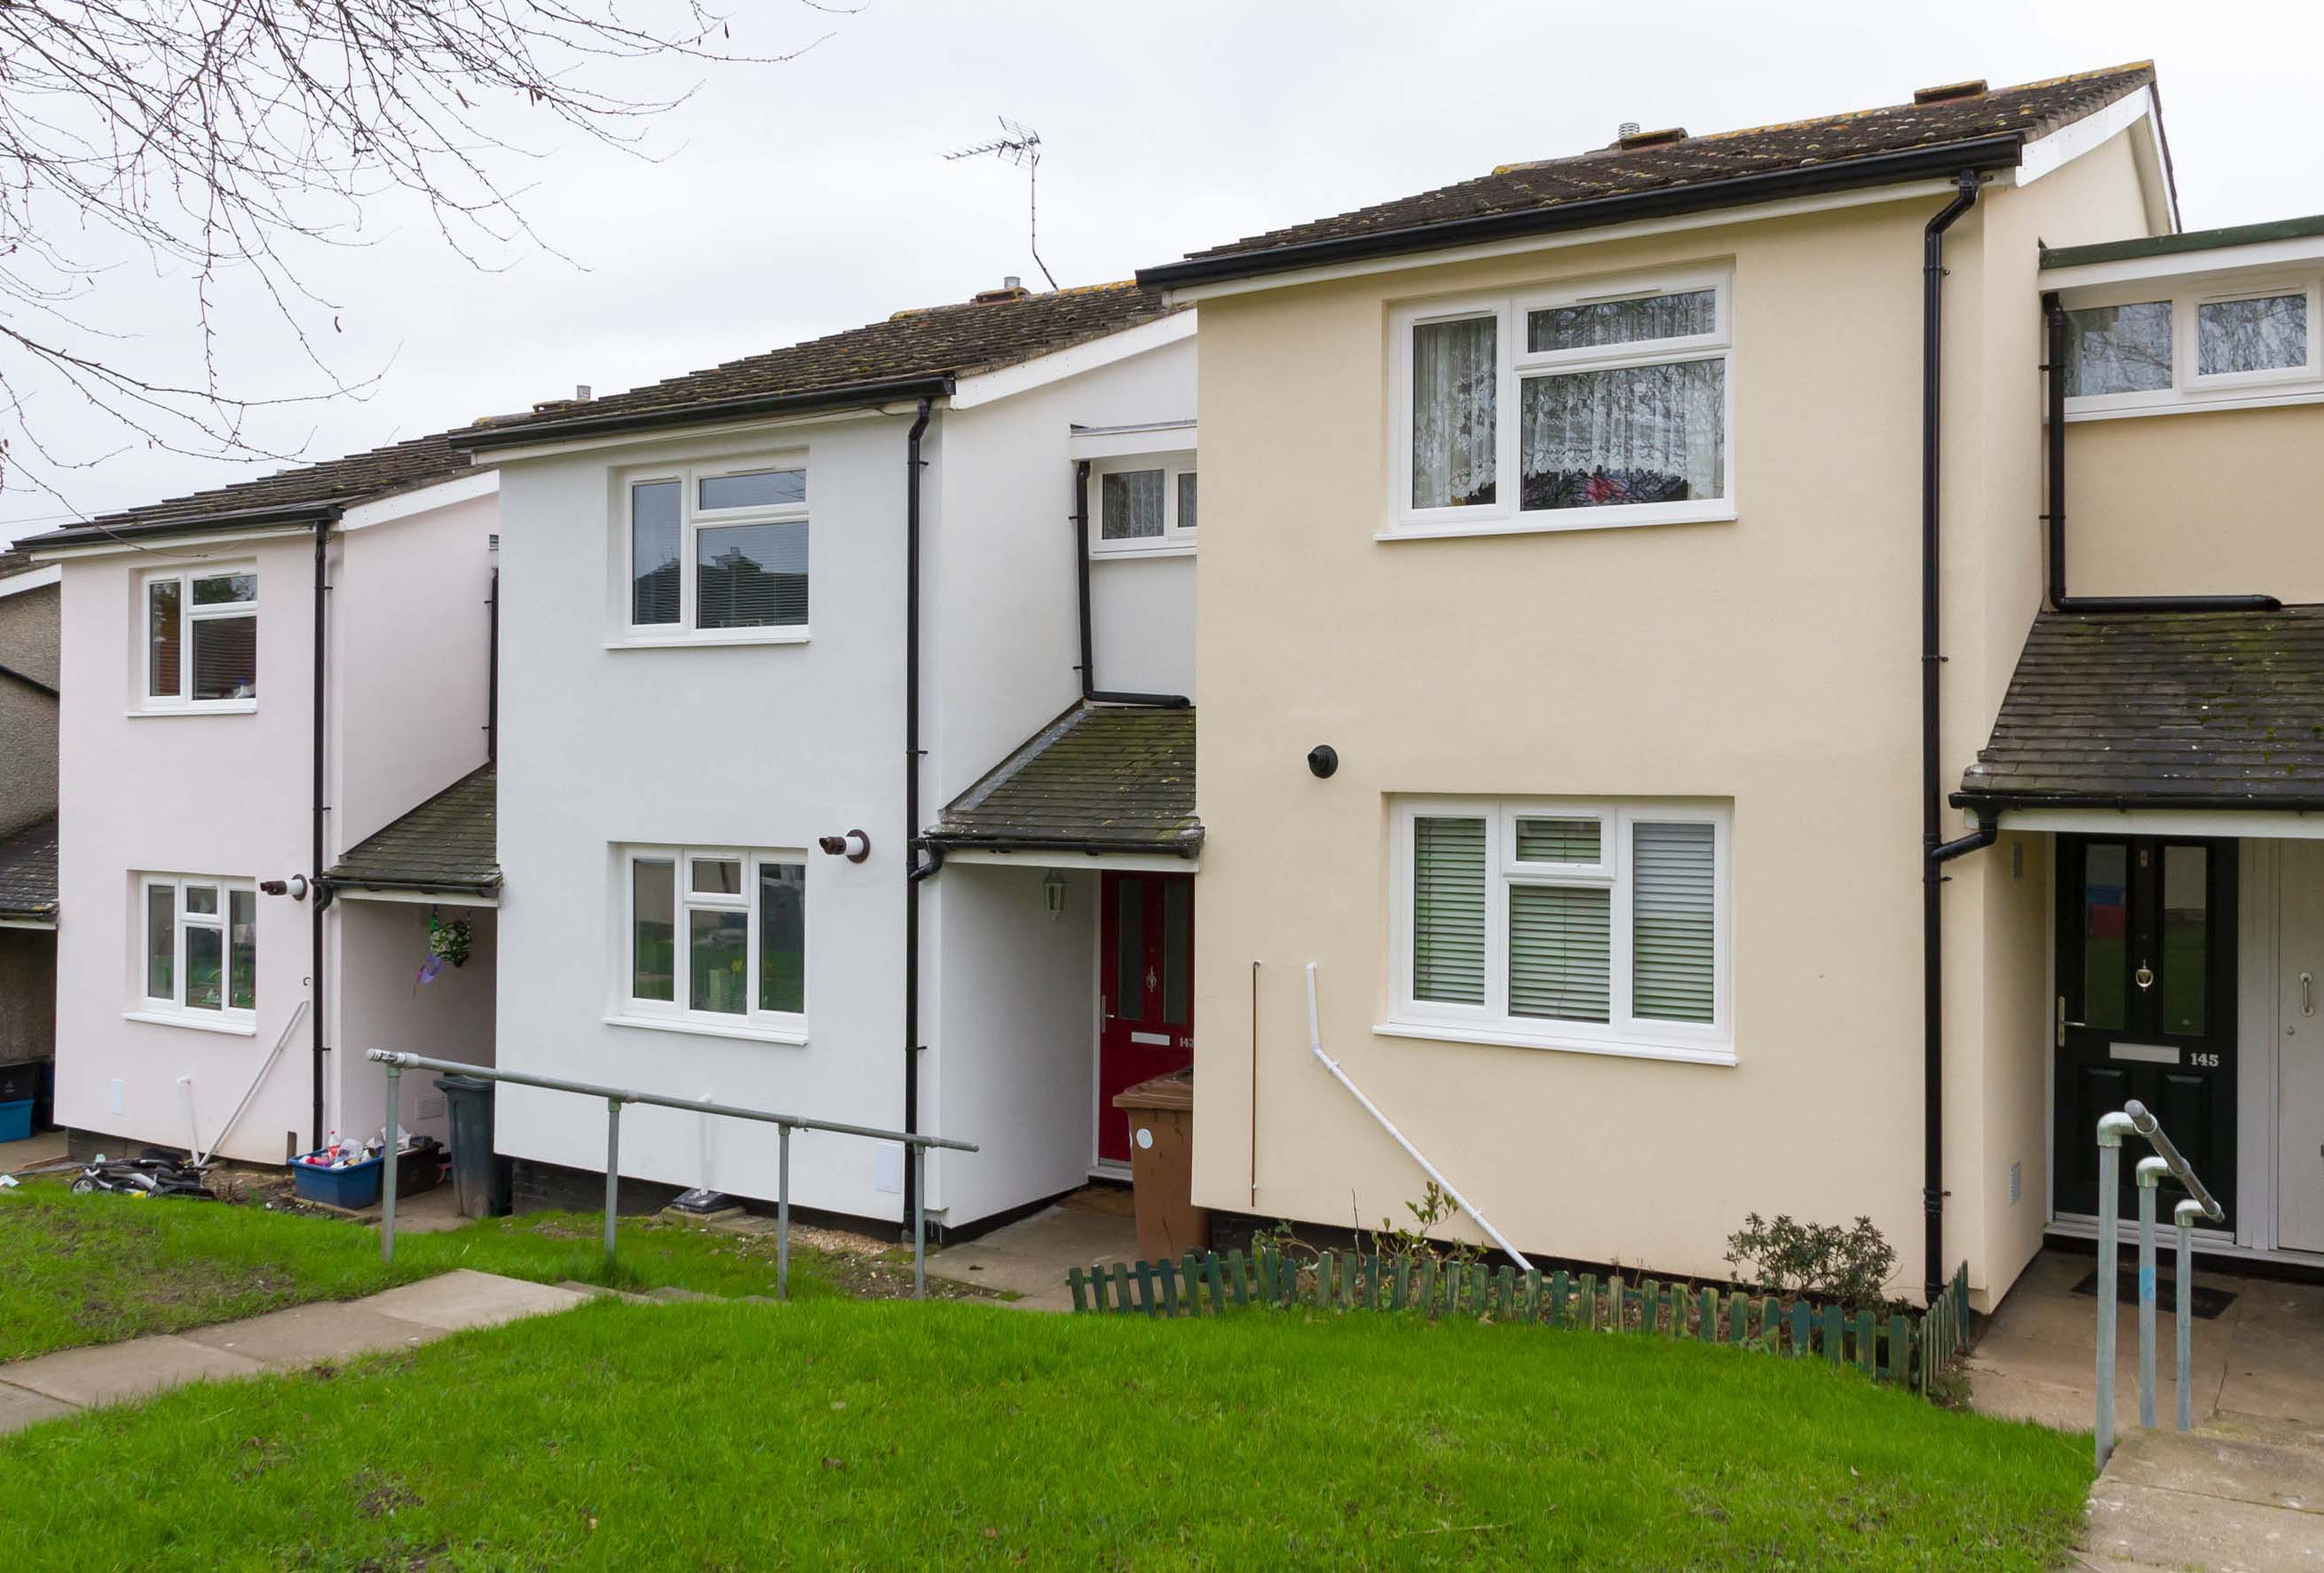 Stevenage Homes Brought Up to Spec With Saint-Gobain Weber External Wall Insulation